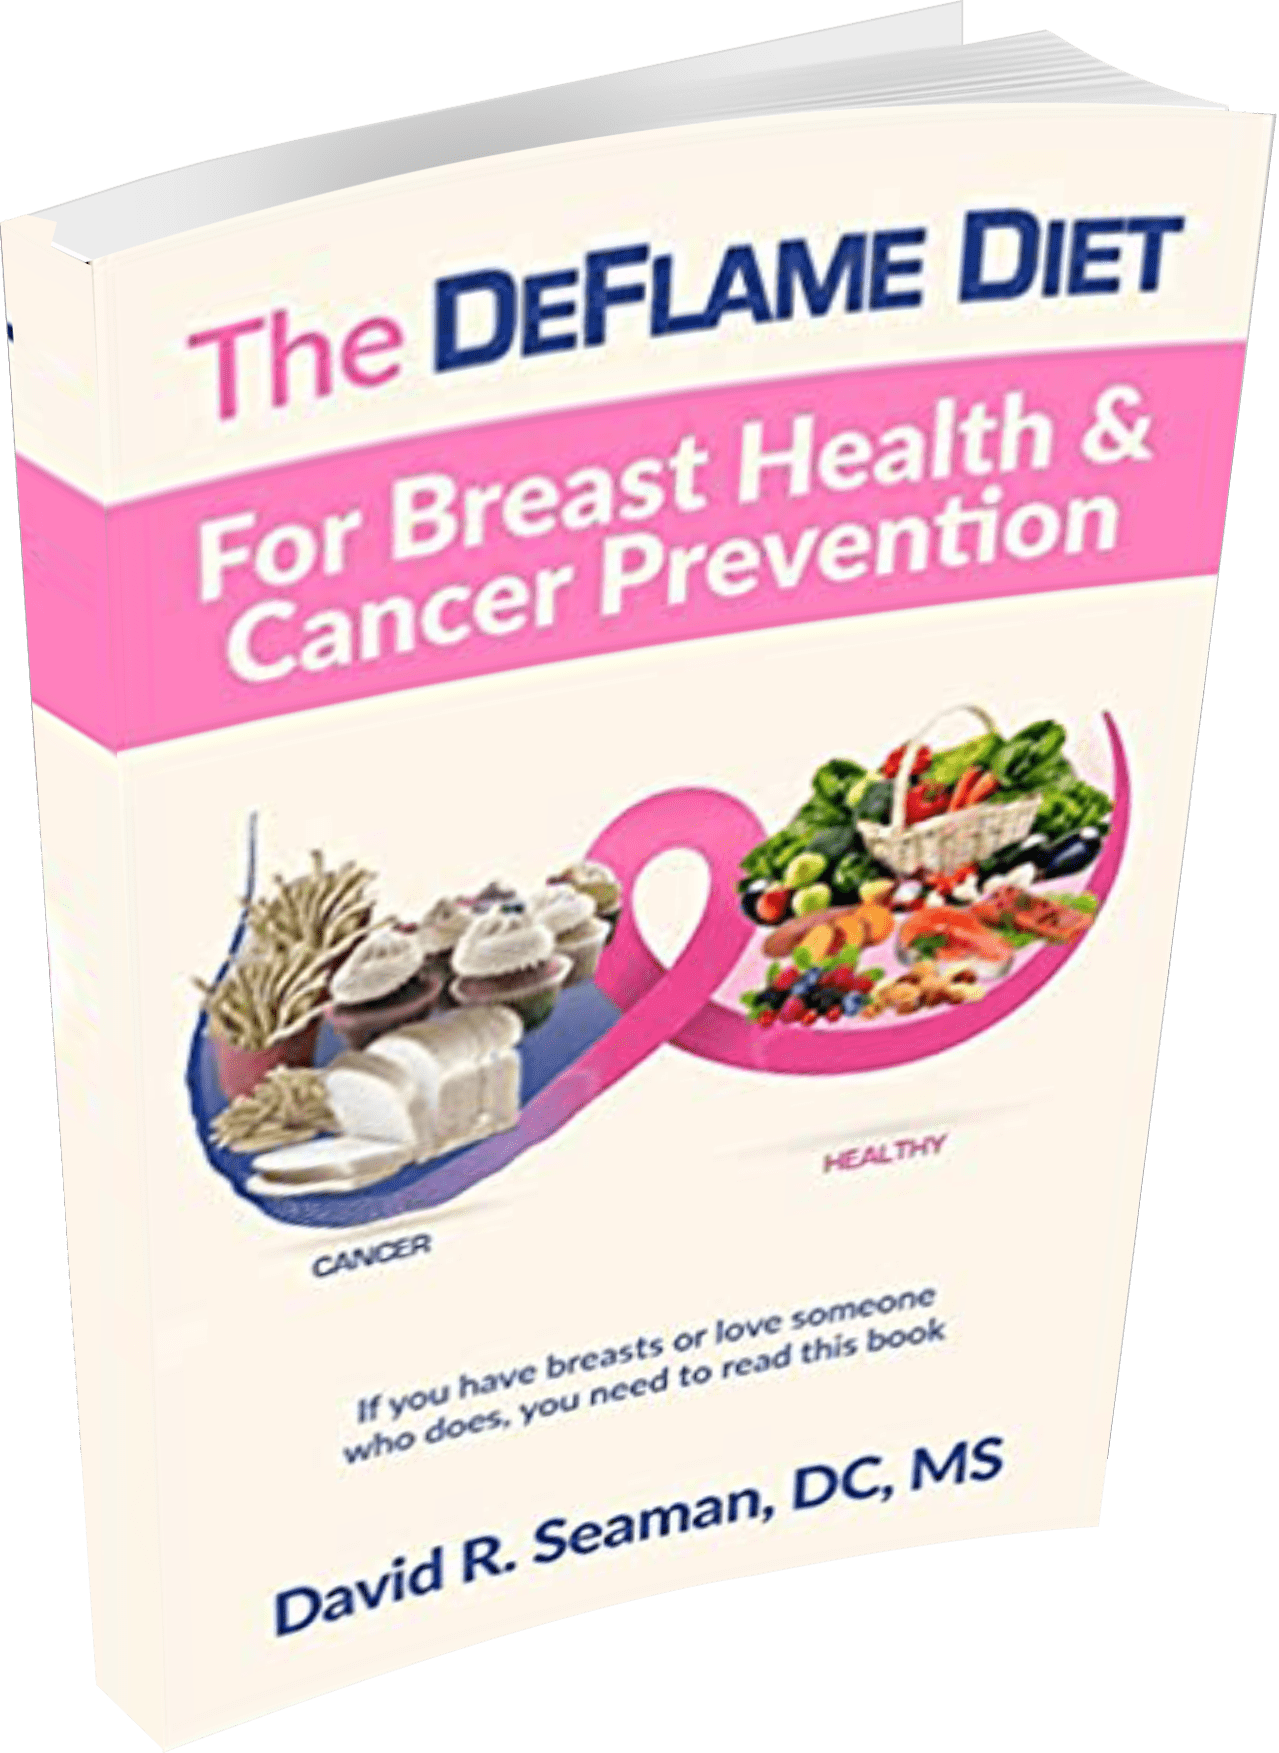 DeFlame book for Breast Cancer